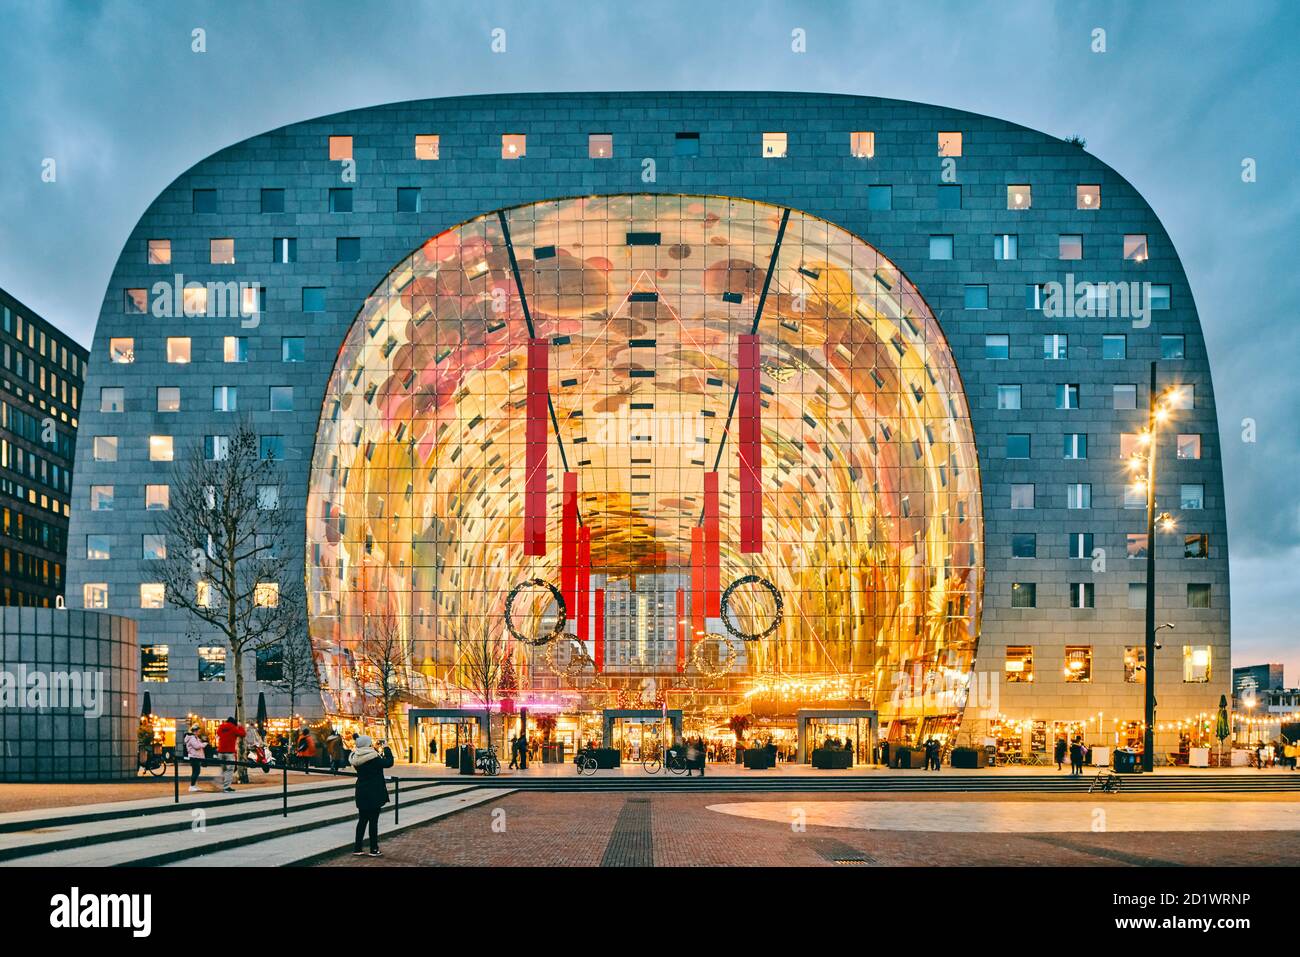 The Markthal or Market Hall in Rotterdam, Netherlands is a mixed use building with apartments and offices, with a market hall underneath. Opened in 2014.. Stock Photo